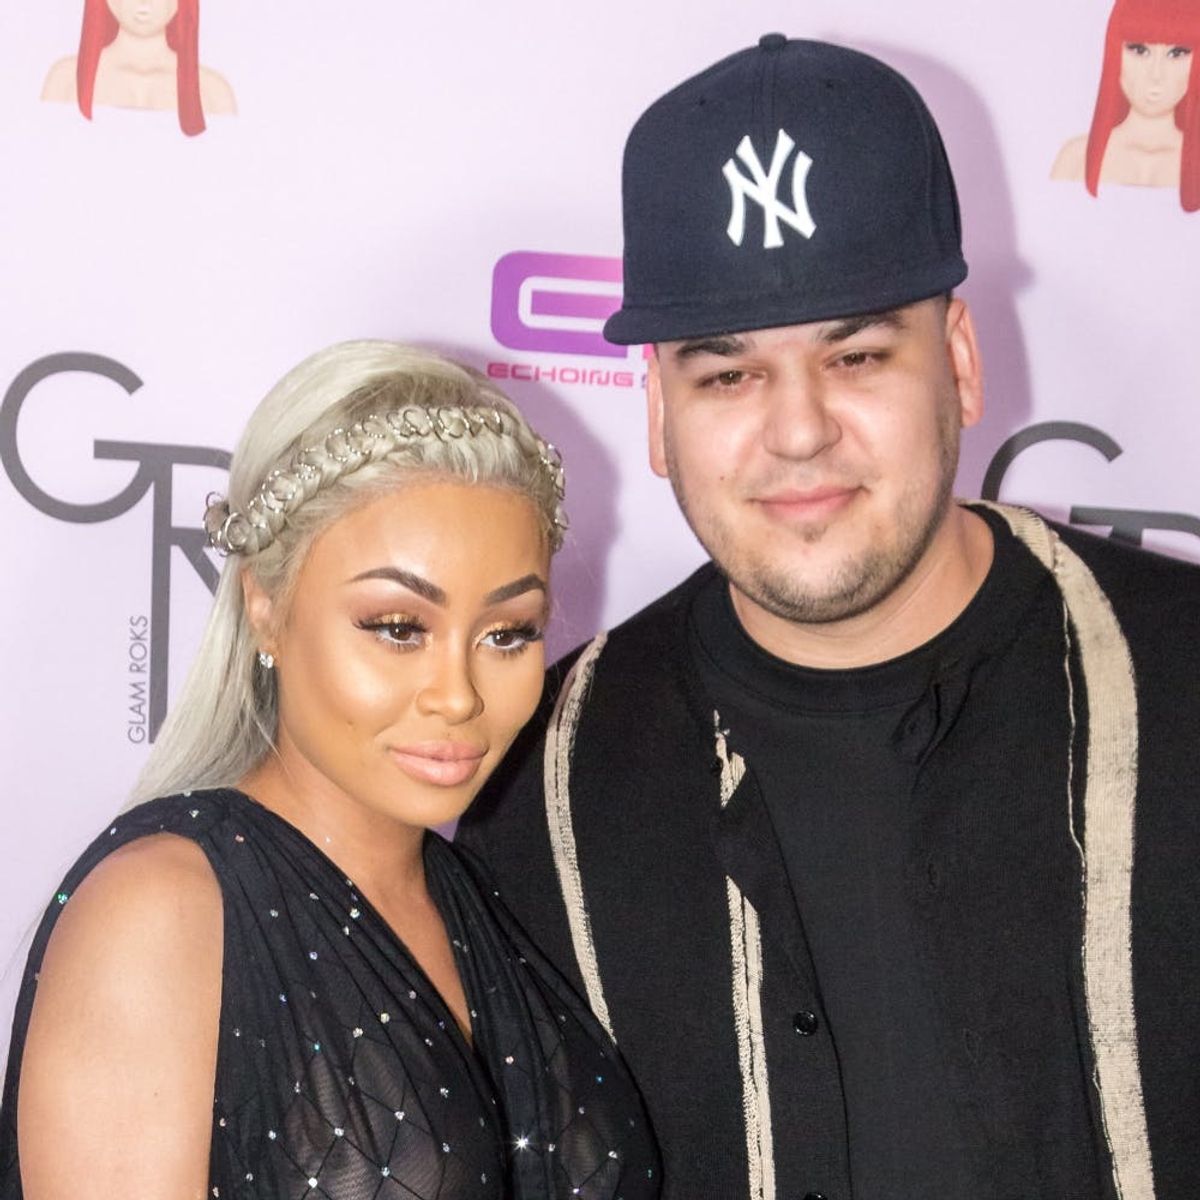 Rob Kardashian and Blac Chyna Have Revealed the Sex of Their Baby